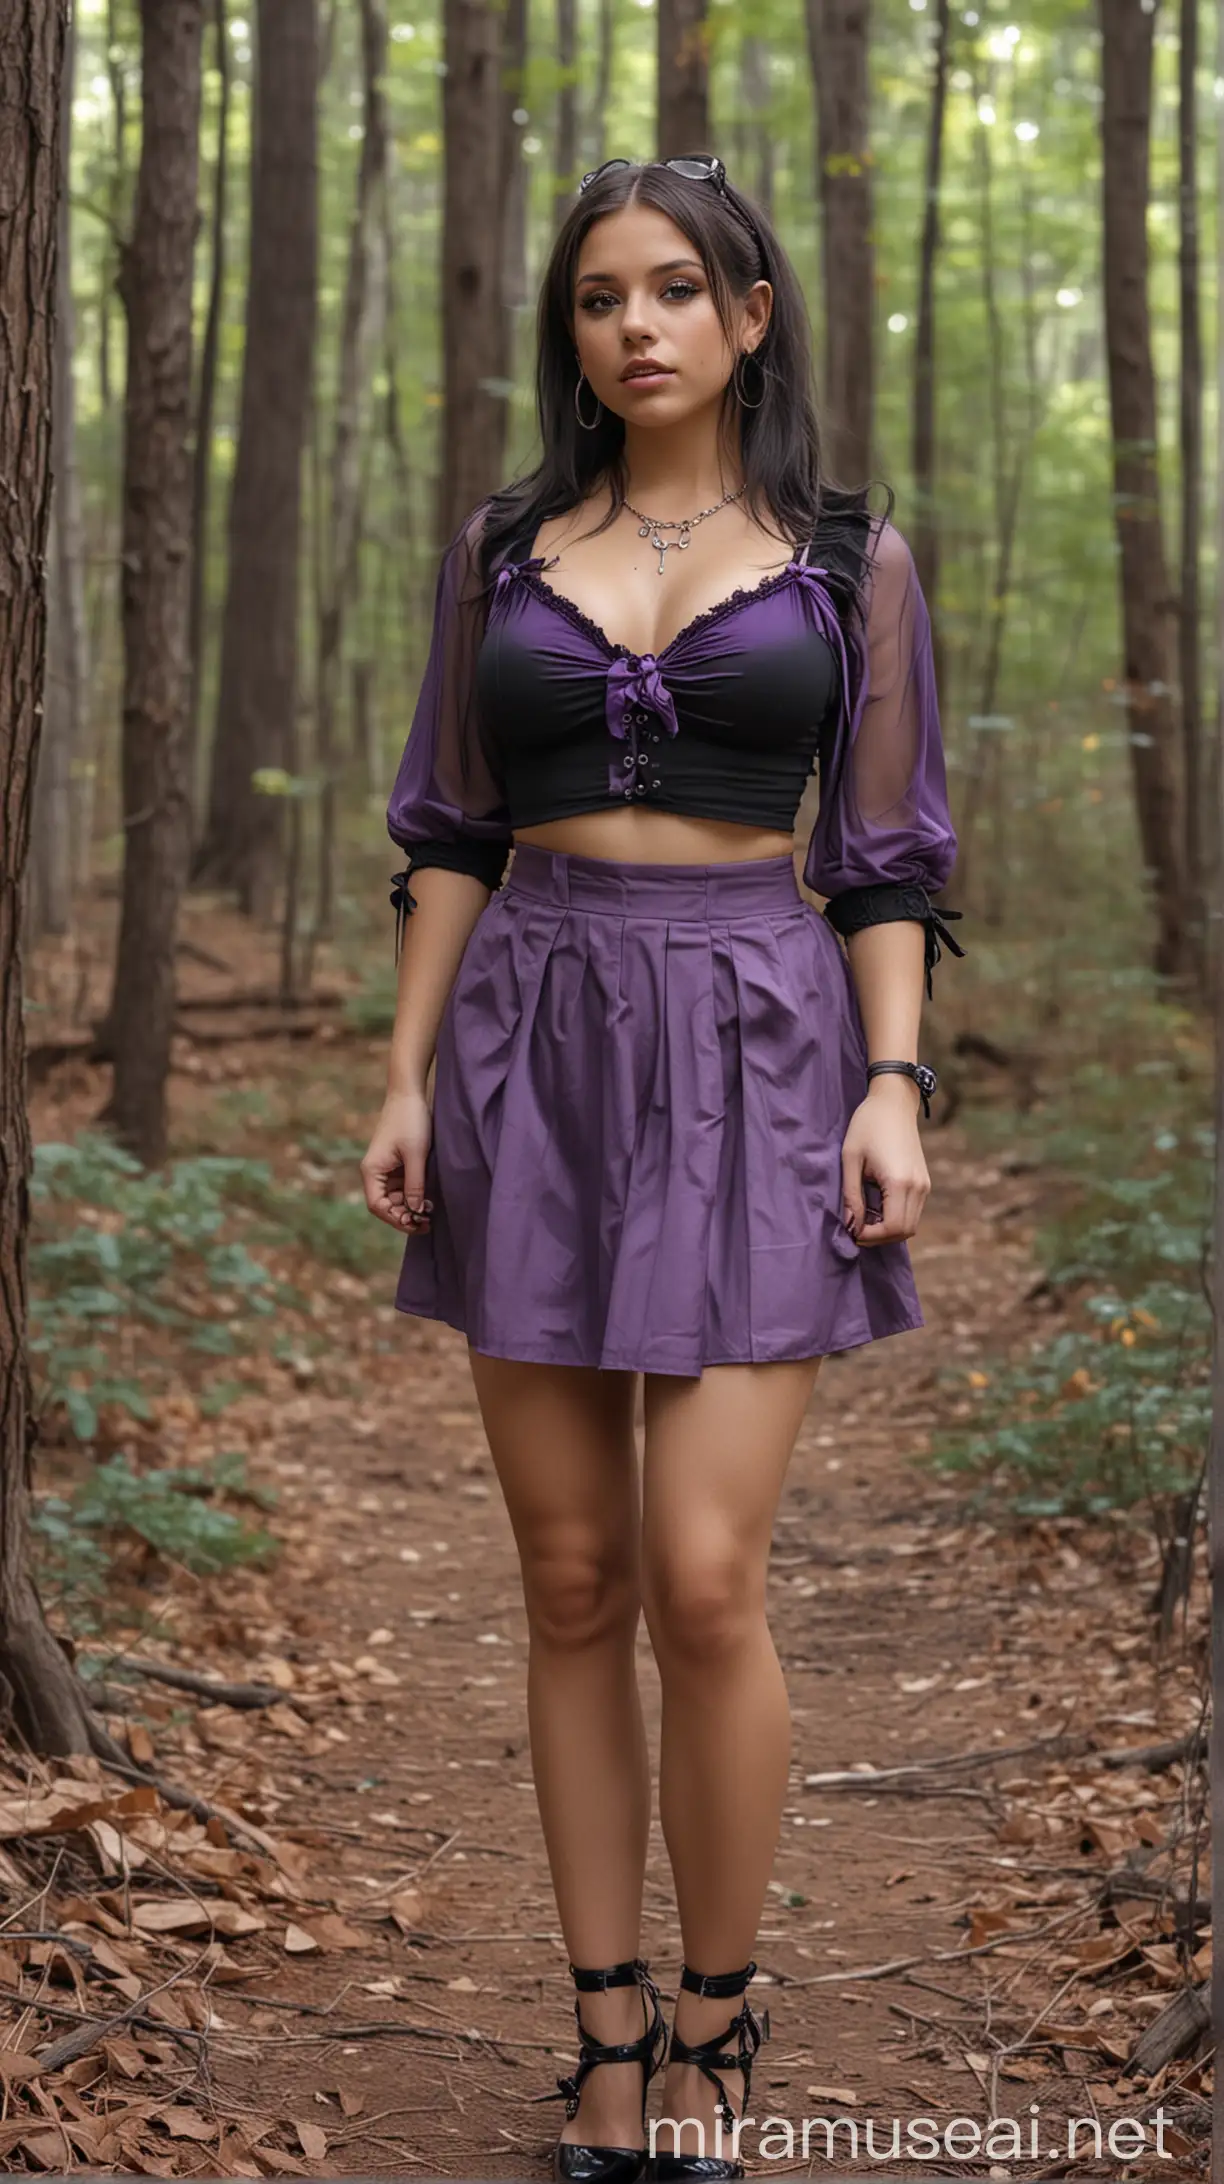 4k Ai art beautiful USA girl  hair ribbon nose ring ear tops nice heels purple mini skirt and transparent gray shirt and black bra and big round tits in usa forest wood work